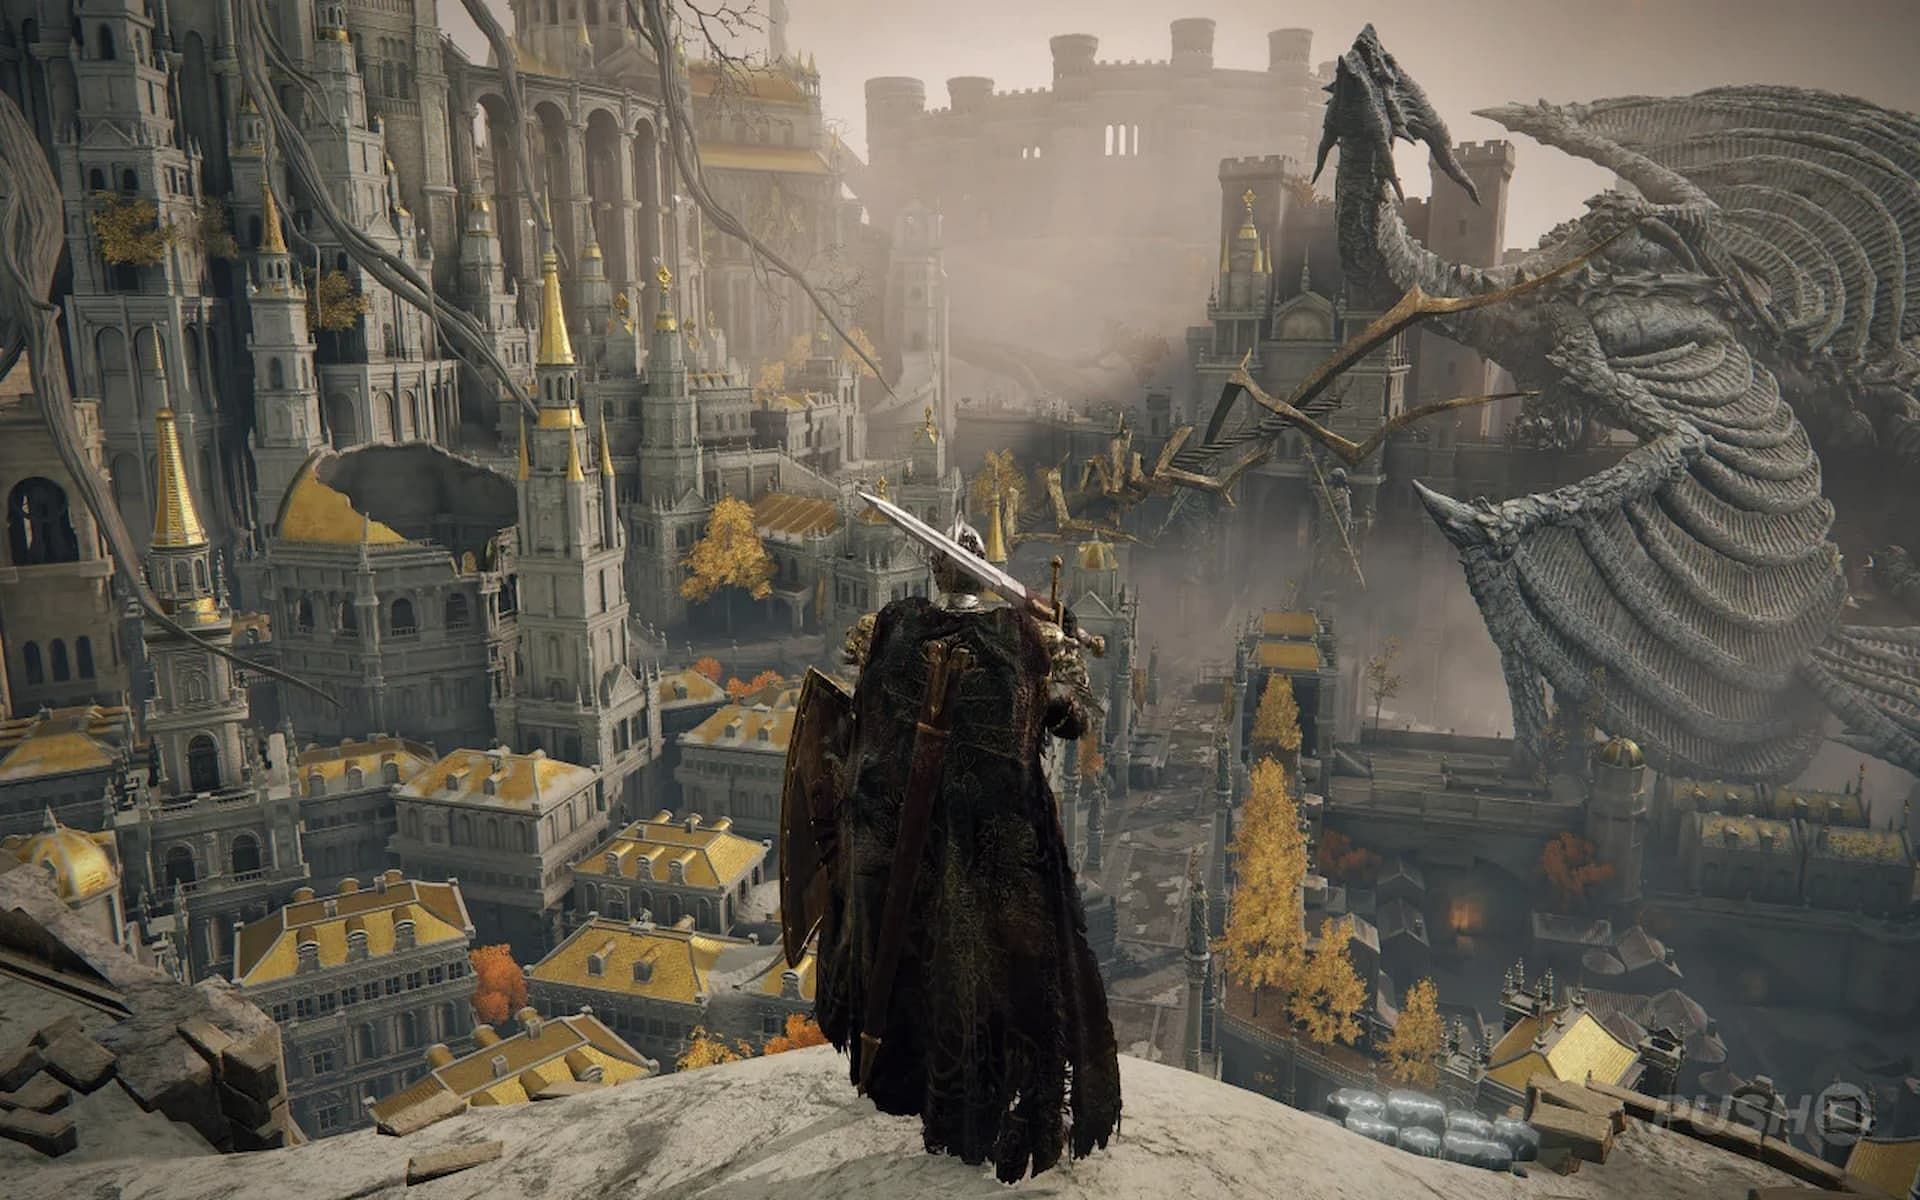 A player arrives at Leyndell, Royal Capital in Elden Ring (Image via FromSoftware Inc.)